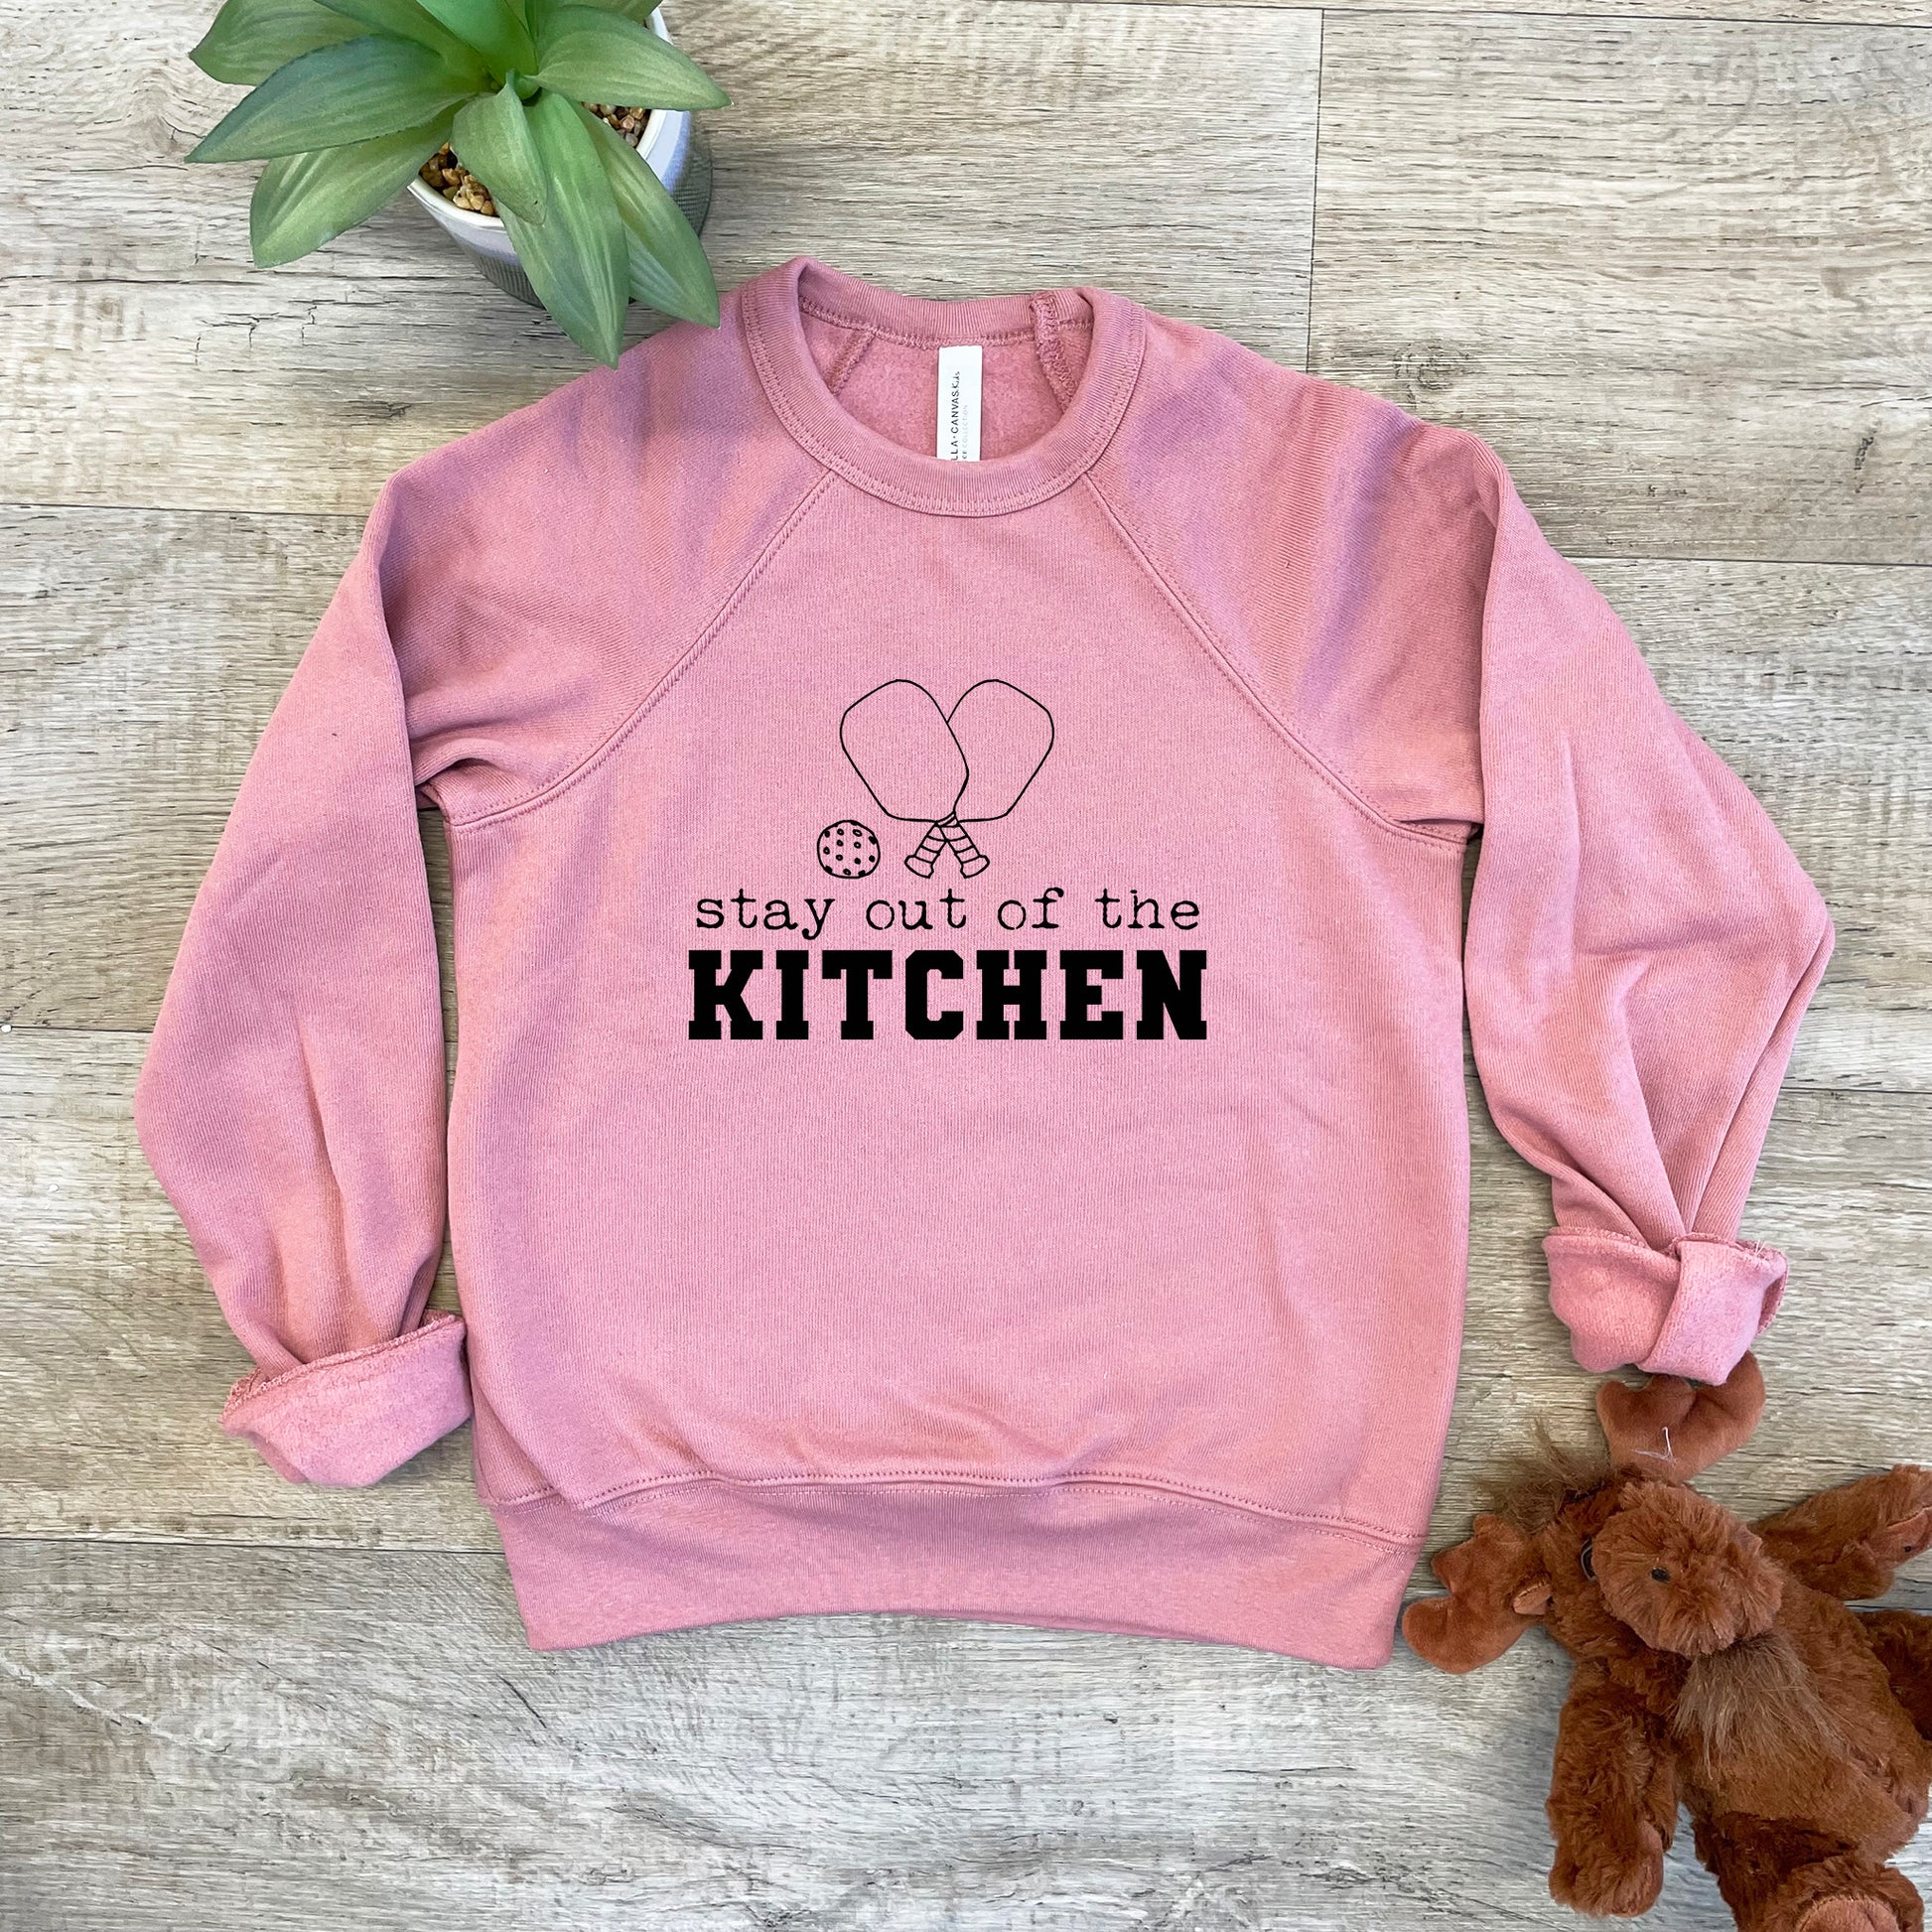 a pink sweatshirt that says stay out of the kitchen next to a teddy bear